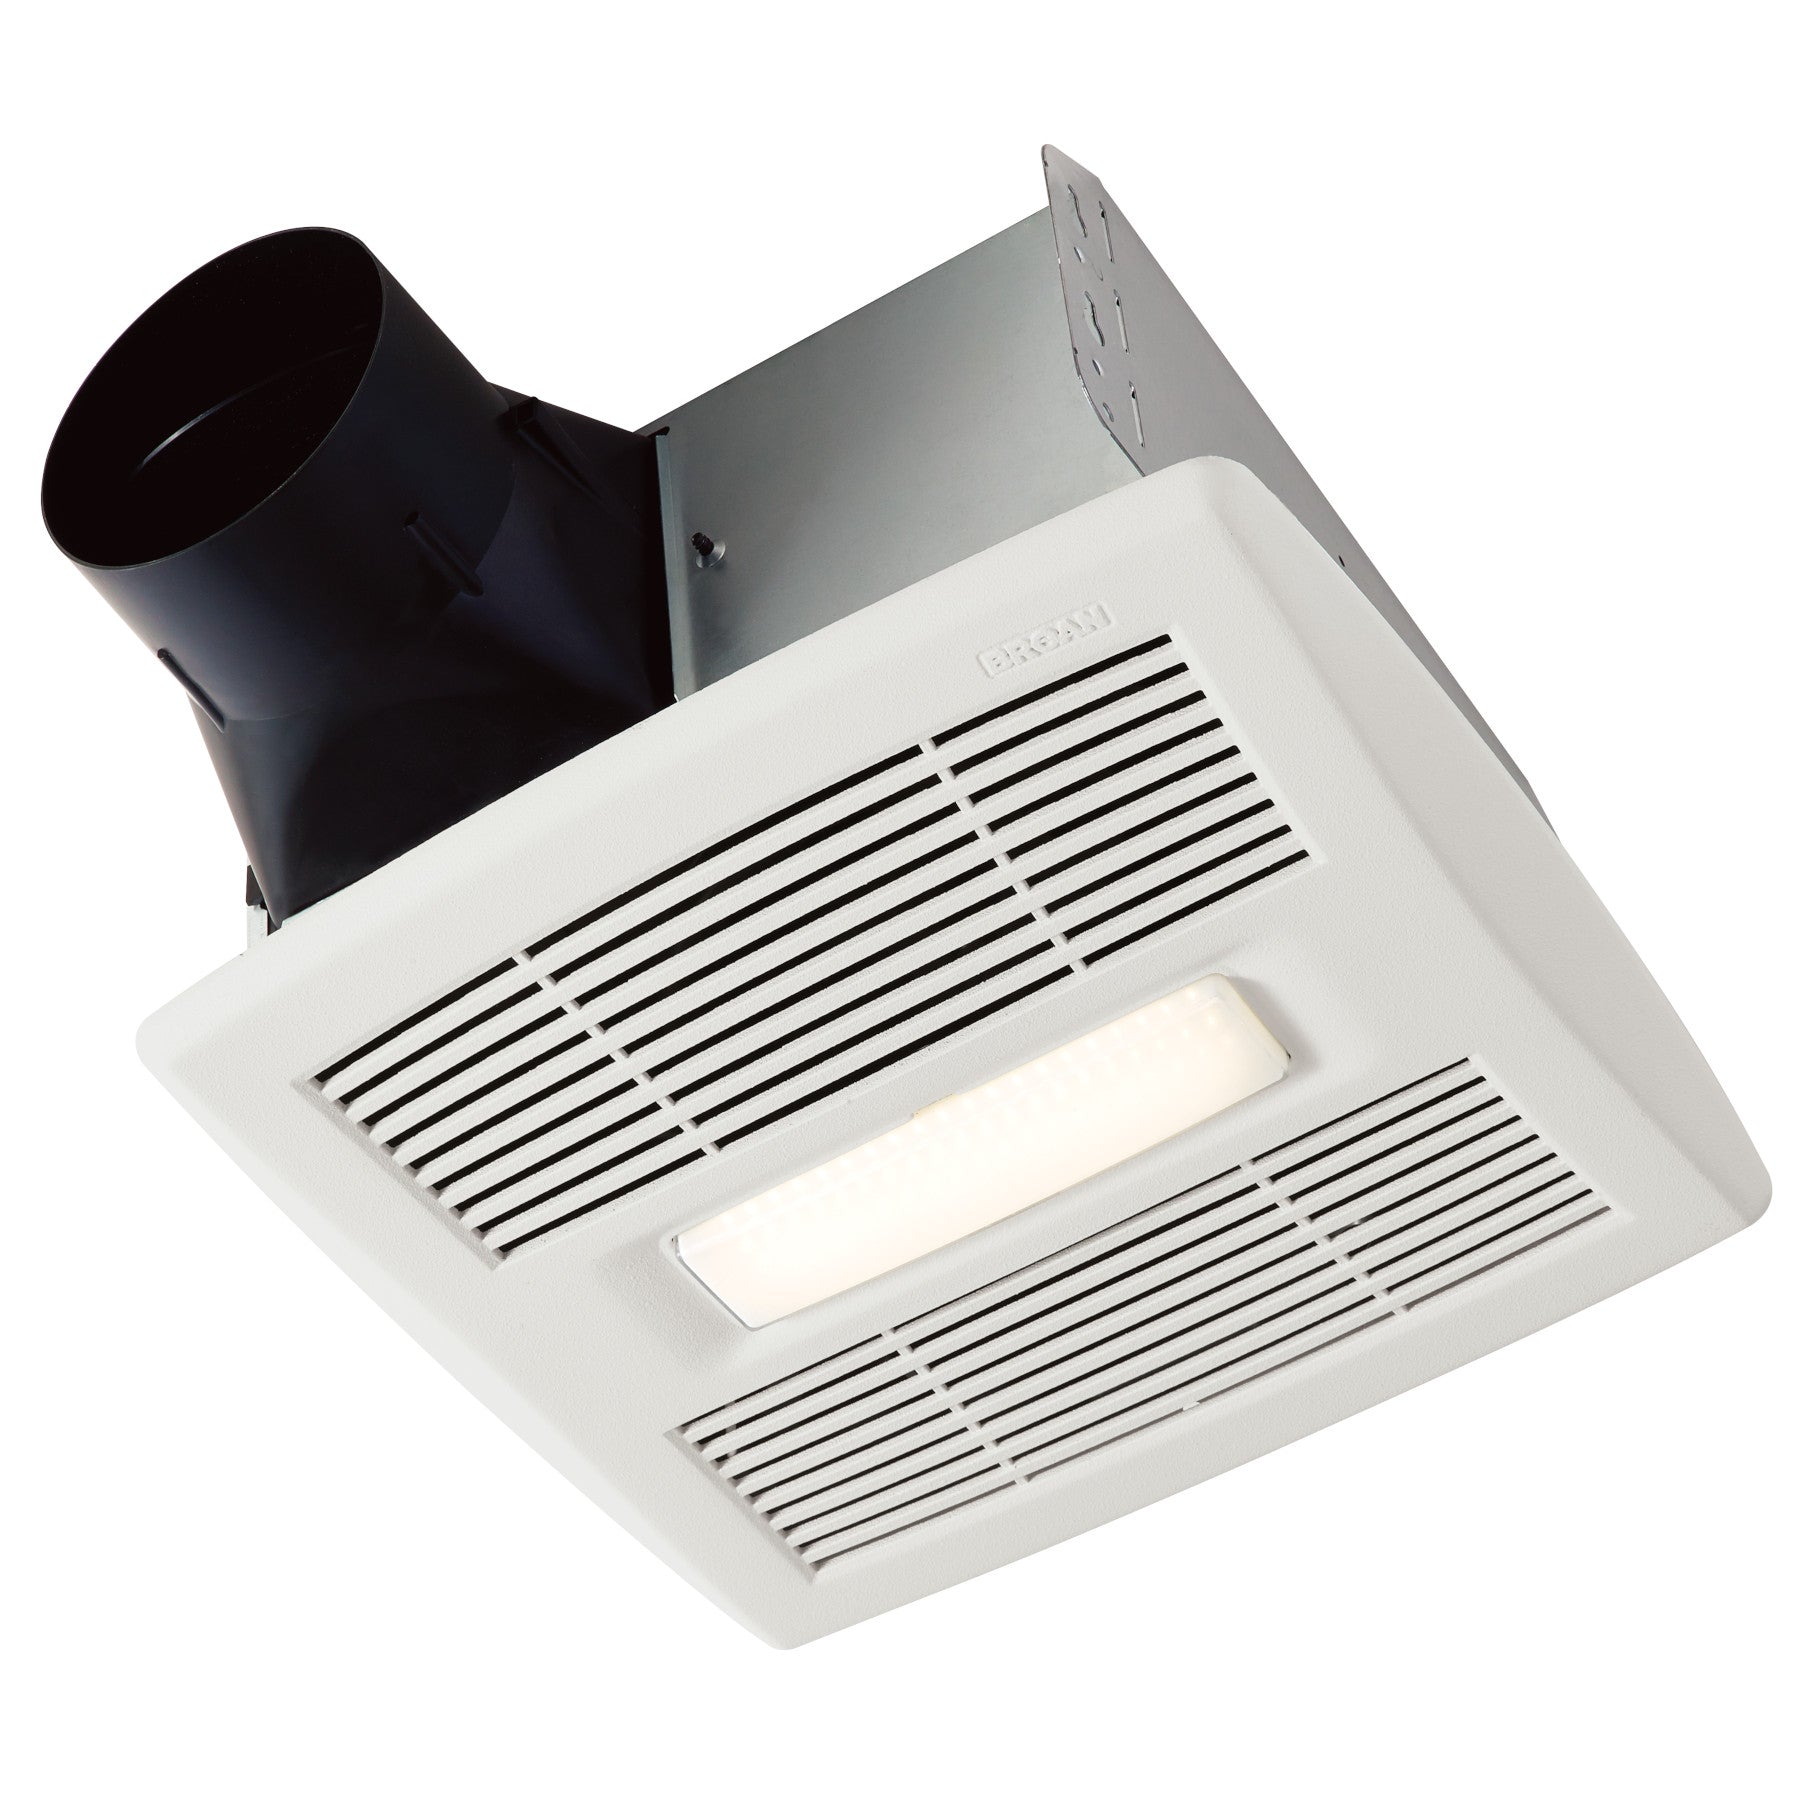 BRO-AE50110DCLBroan AE50110DCL Bathroom Exhaust Fan With LED light 50-110 CFM